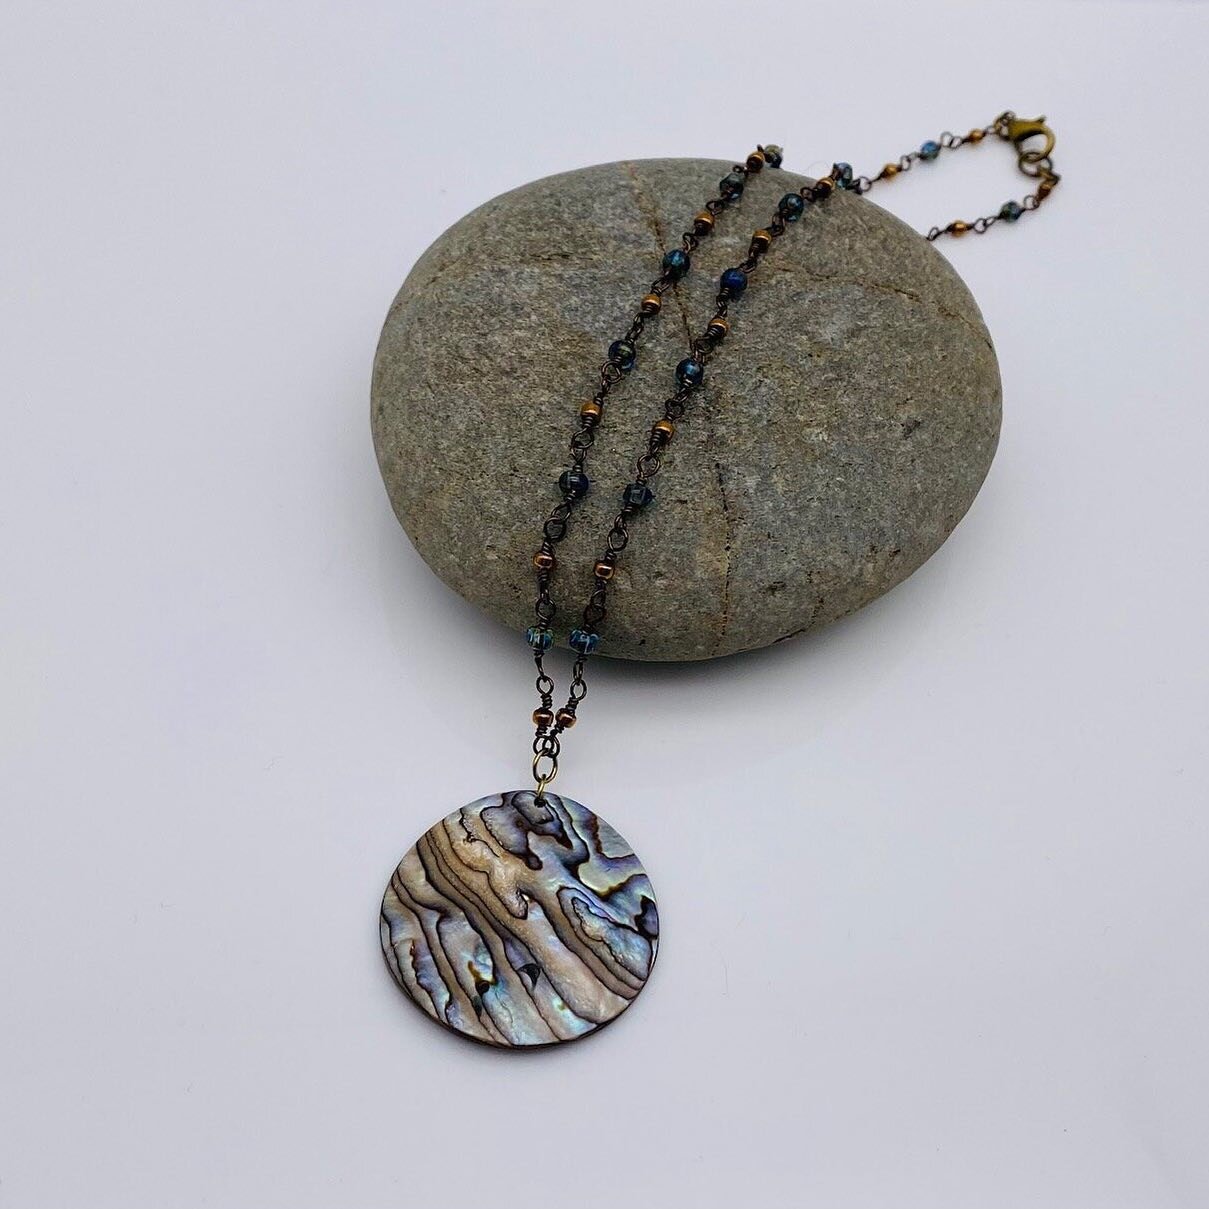 Often used in metaphysics to provide tranquility by serving as a guardian of the heart, abalone shell seeks to remind us of the inner strength we all possess.

Made from bronze plated copper, an abalone shell focal reminiscent of waves hangs from a d